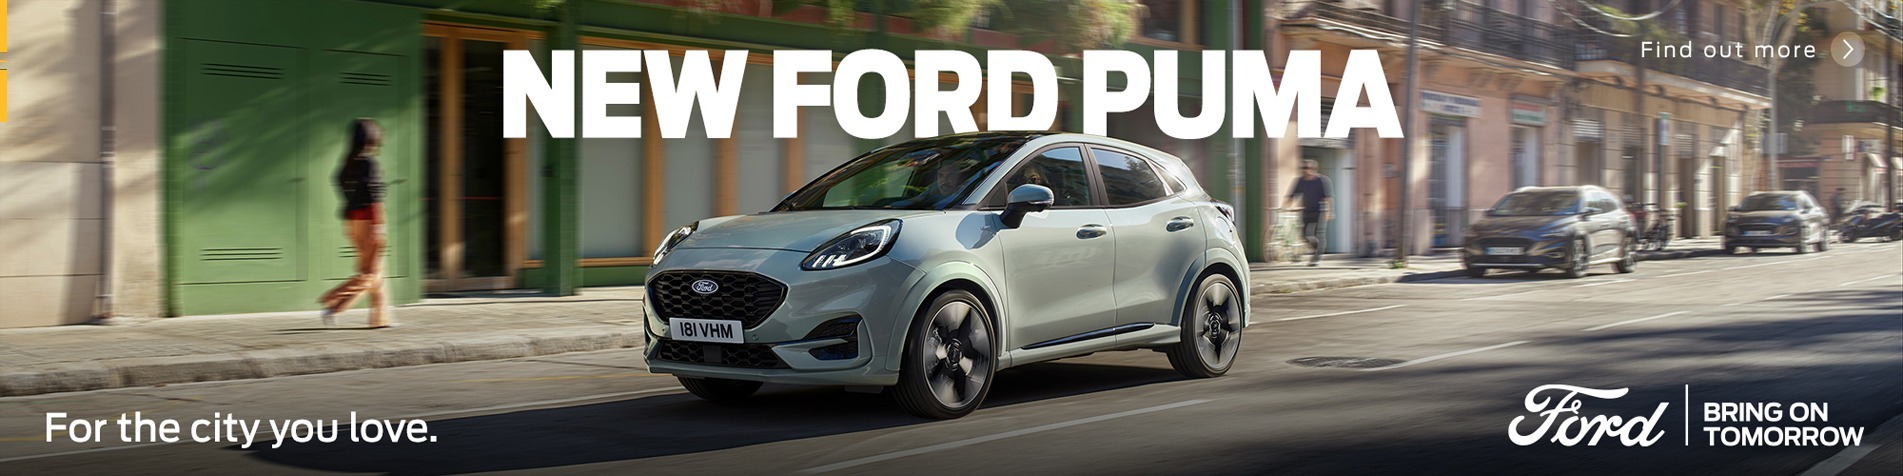 The New Ford Puma